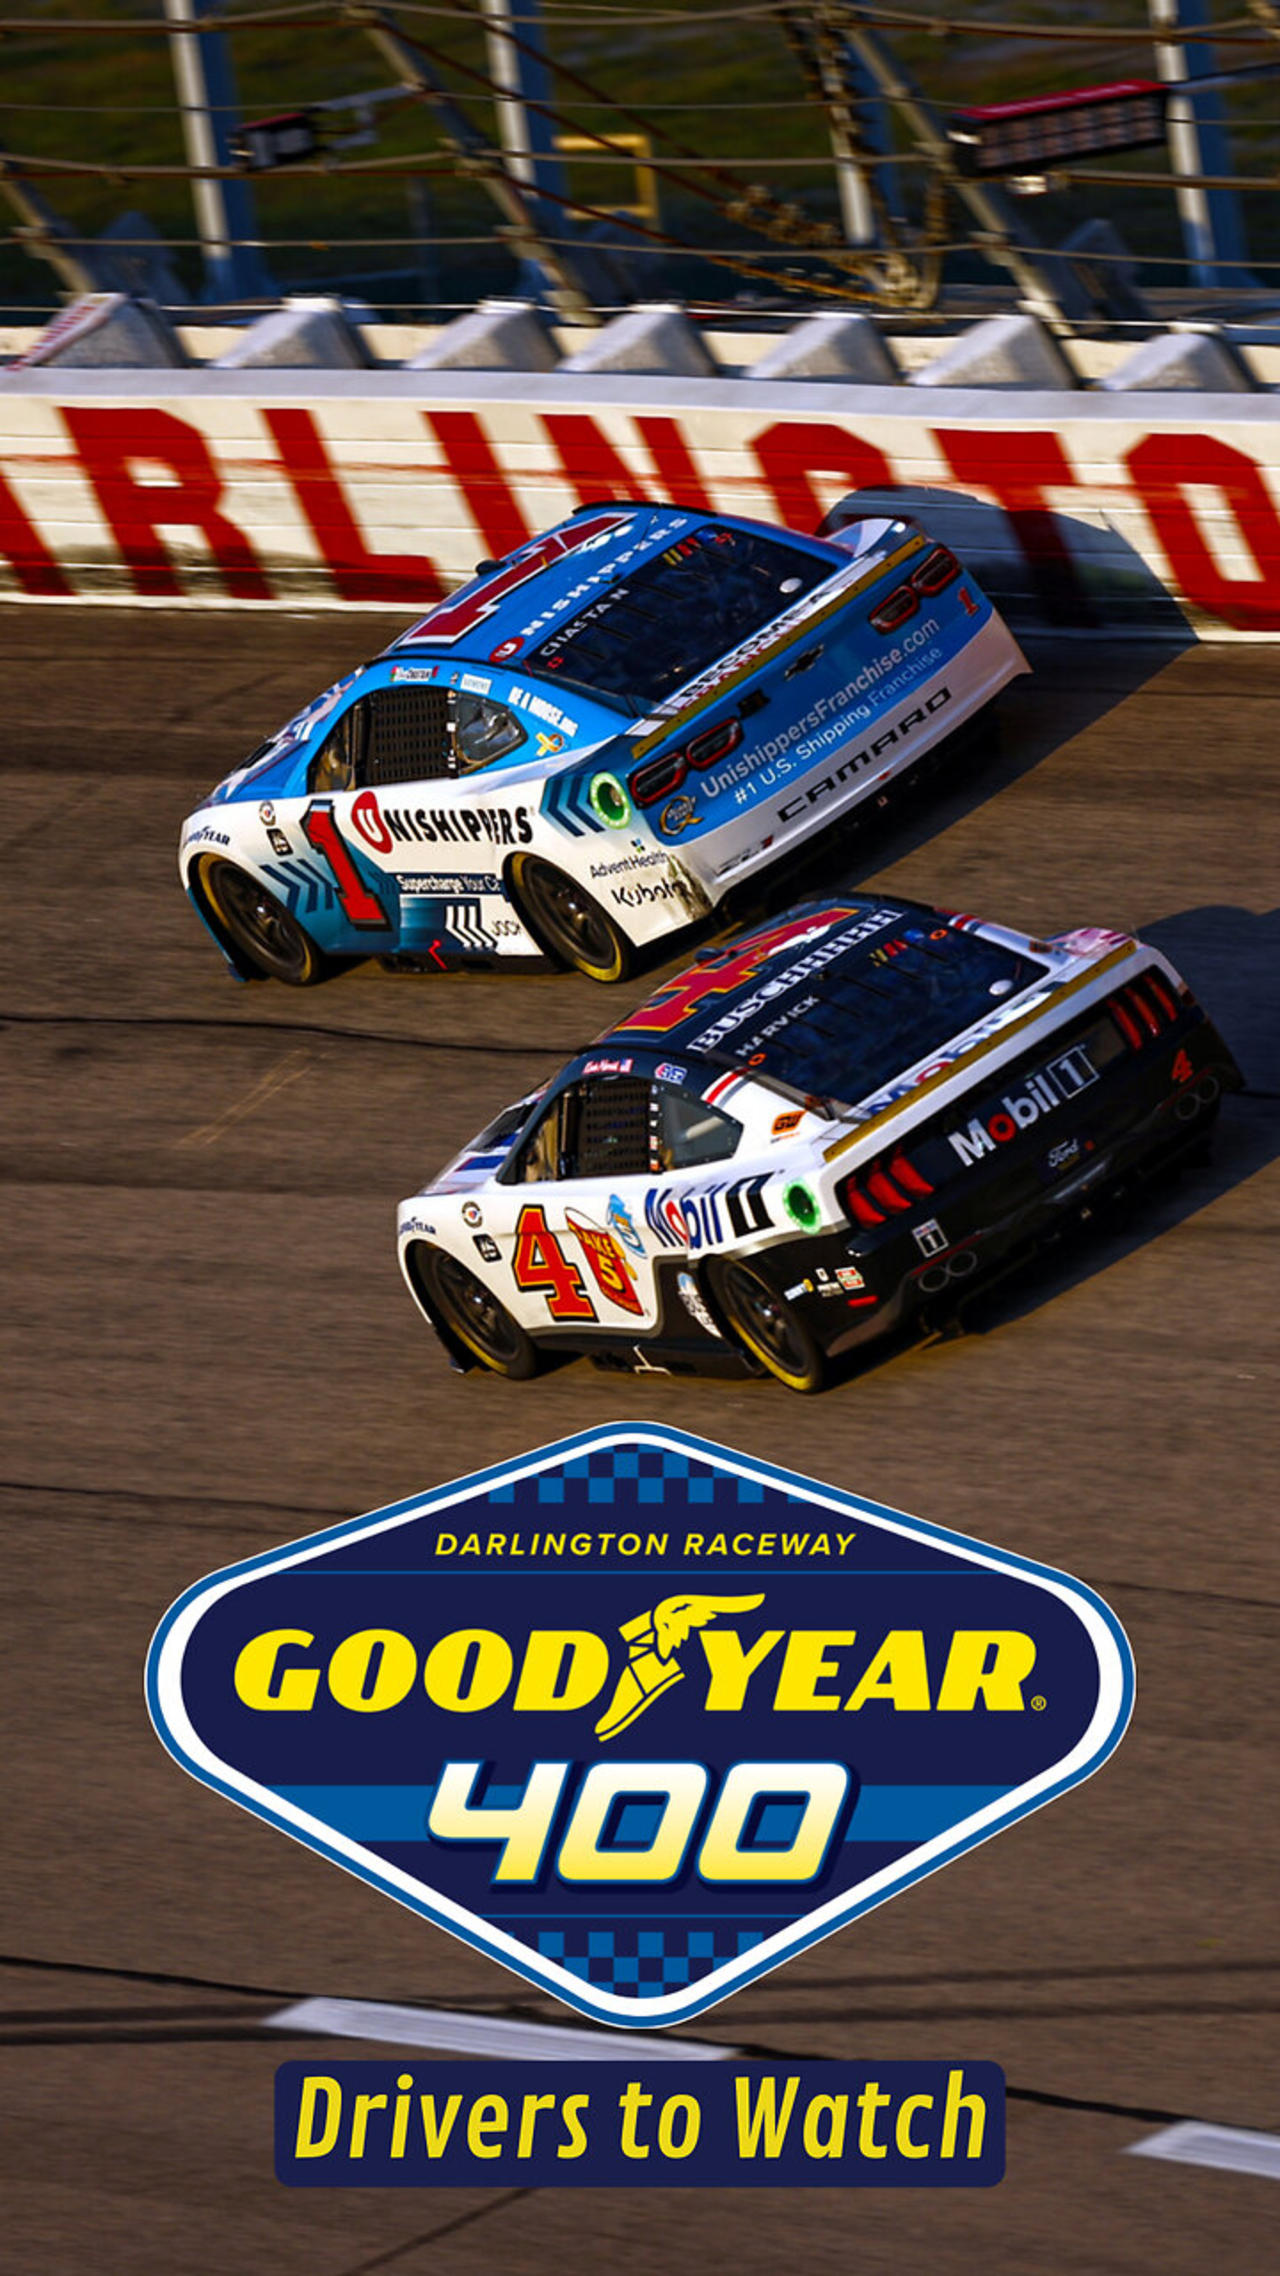 NASCAR Drivers to Watch for in the Goodyear 400 from Darlington Raceway